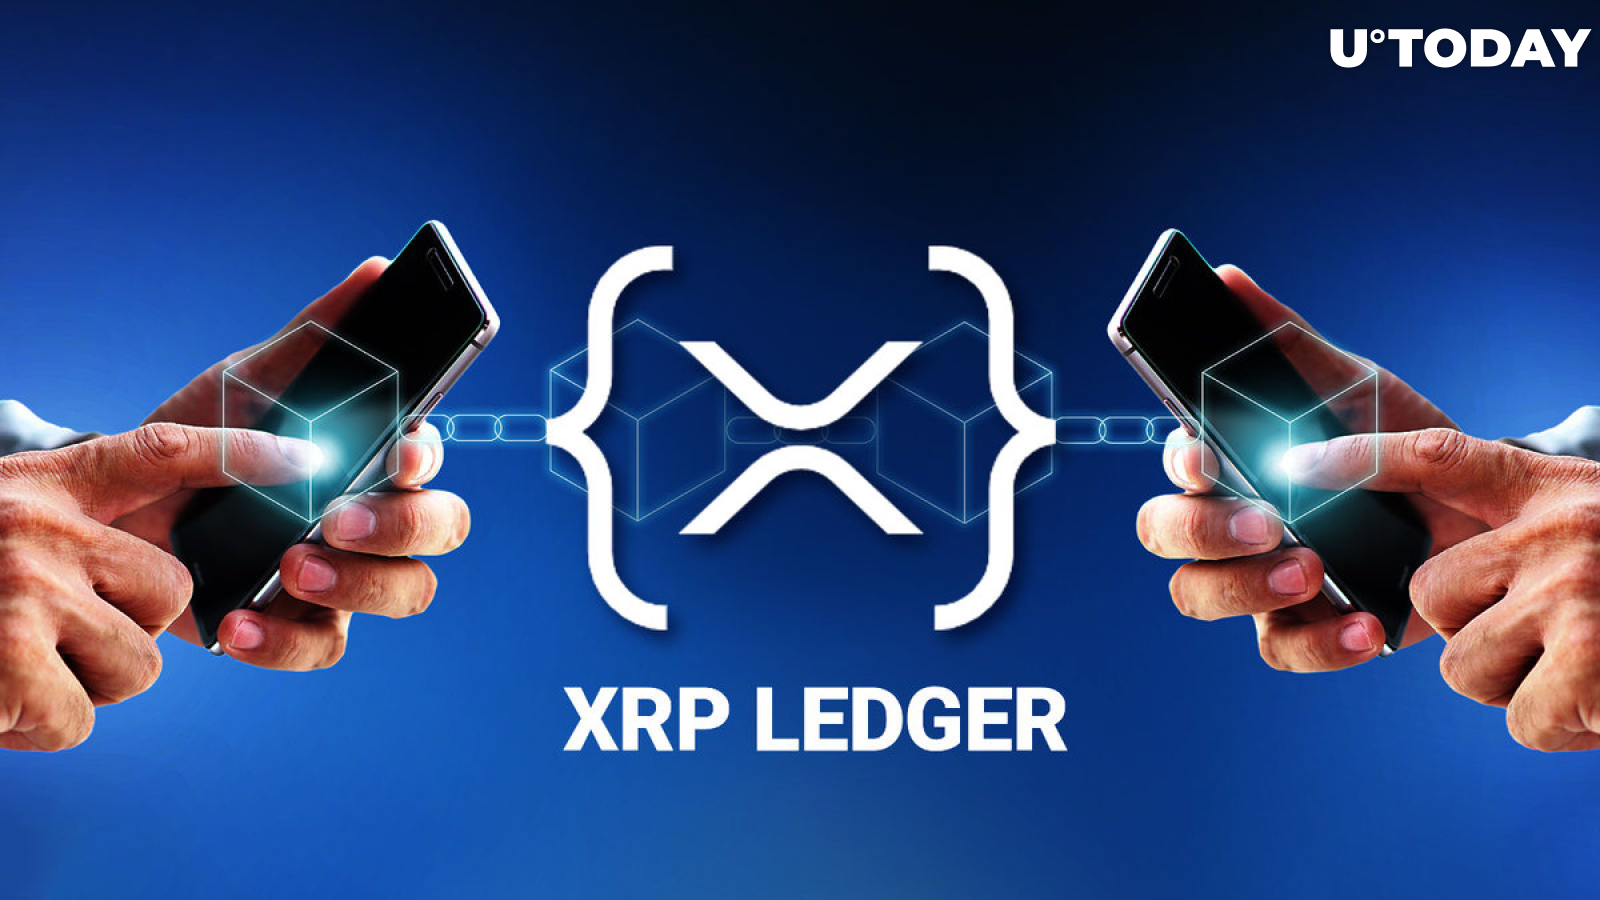 Here's How To Build XRPL Smart Contracts on Testnet